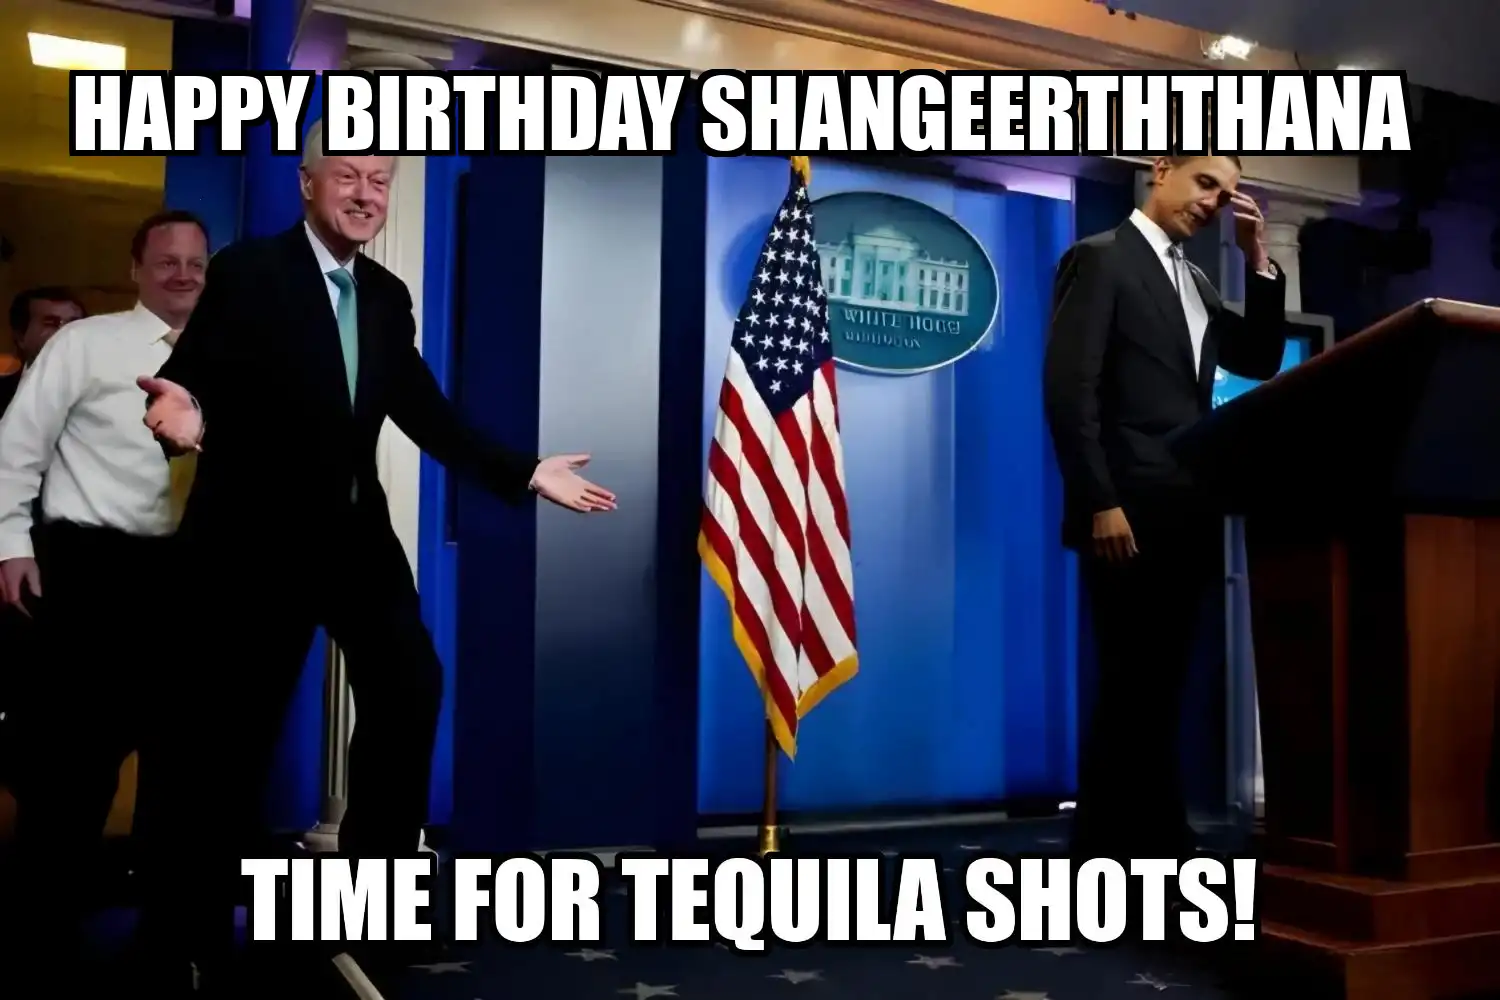 Happy Birthday Shangeerththana Time For Tequila Shots Memes